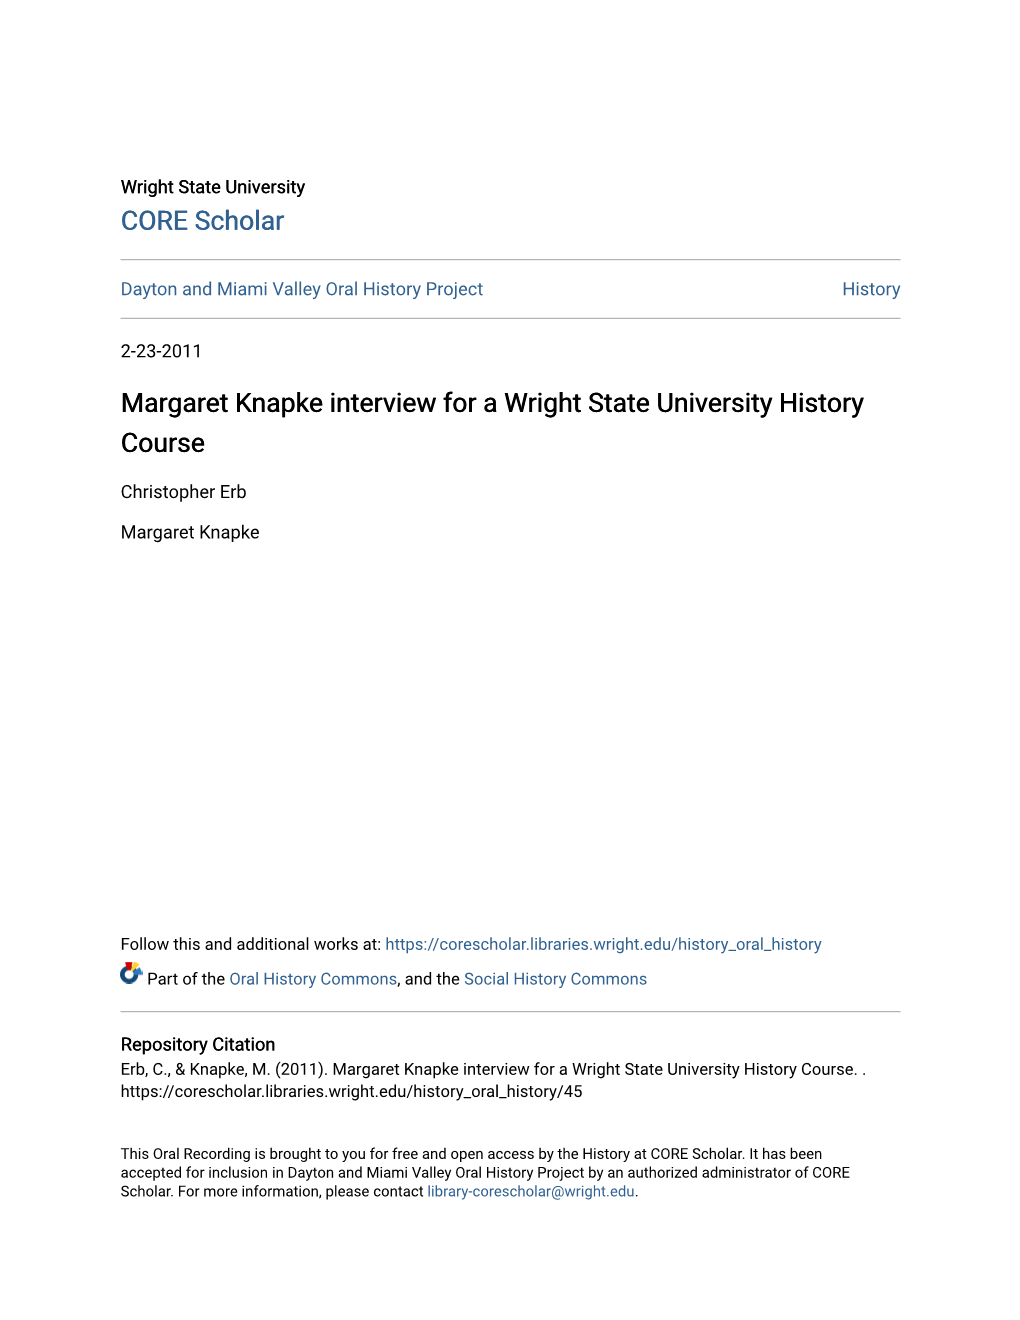 Margaret Knapke Interview for a Wright State University History Course